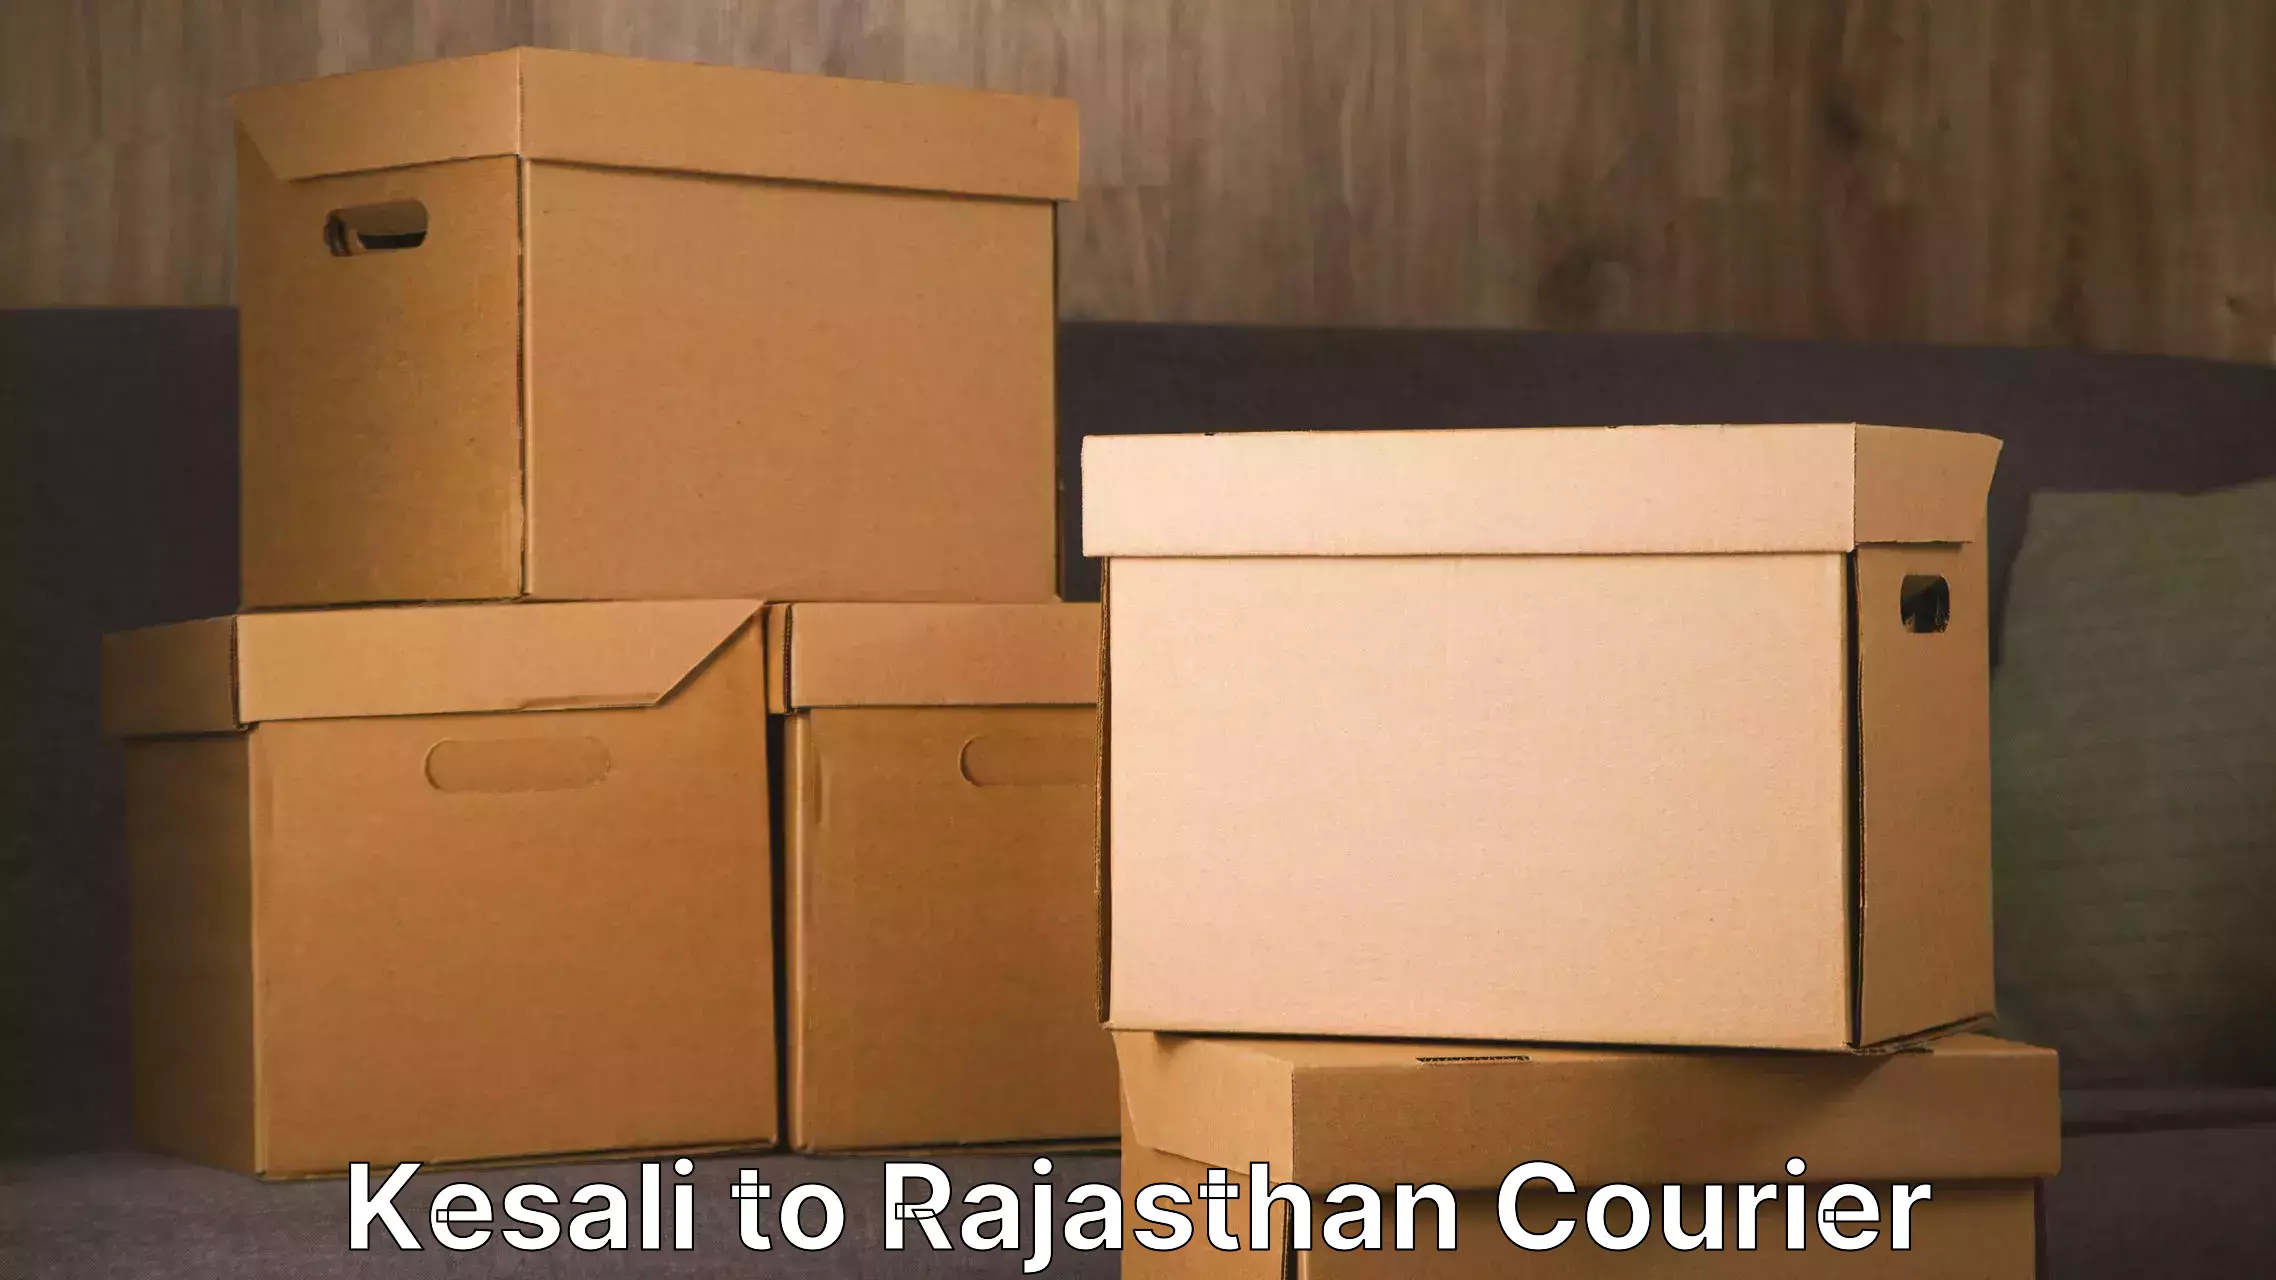 Furniture moving specialists Kesali to Rajasthan